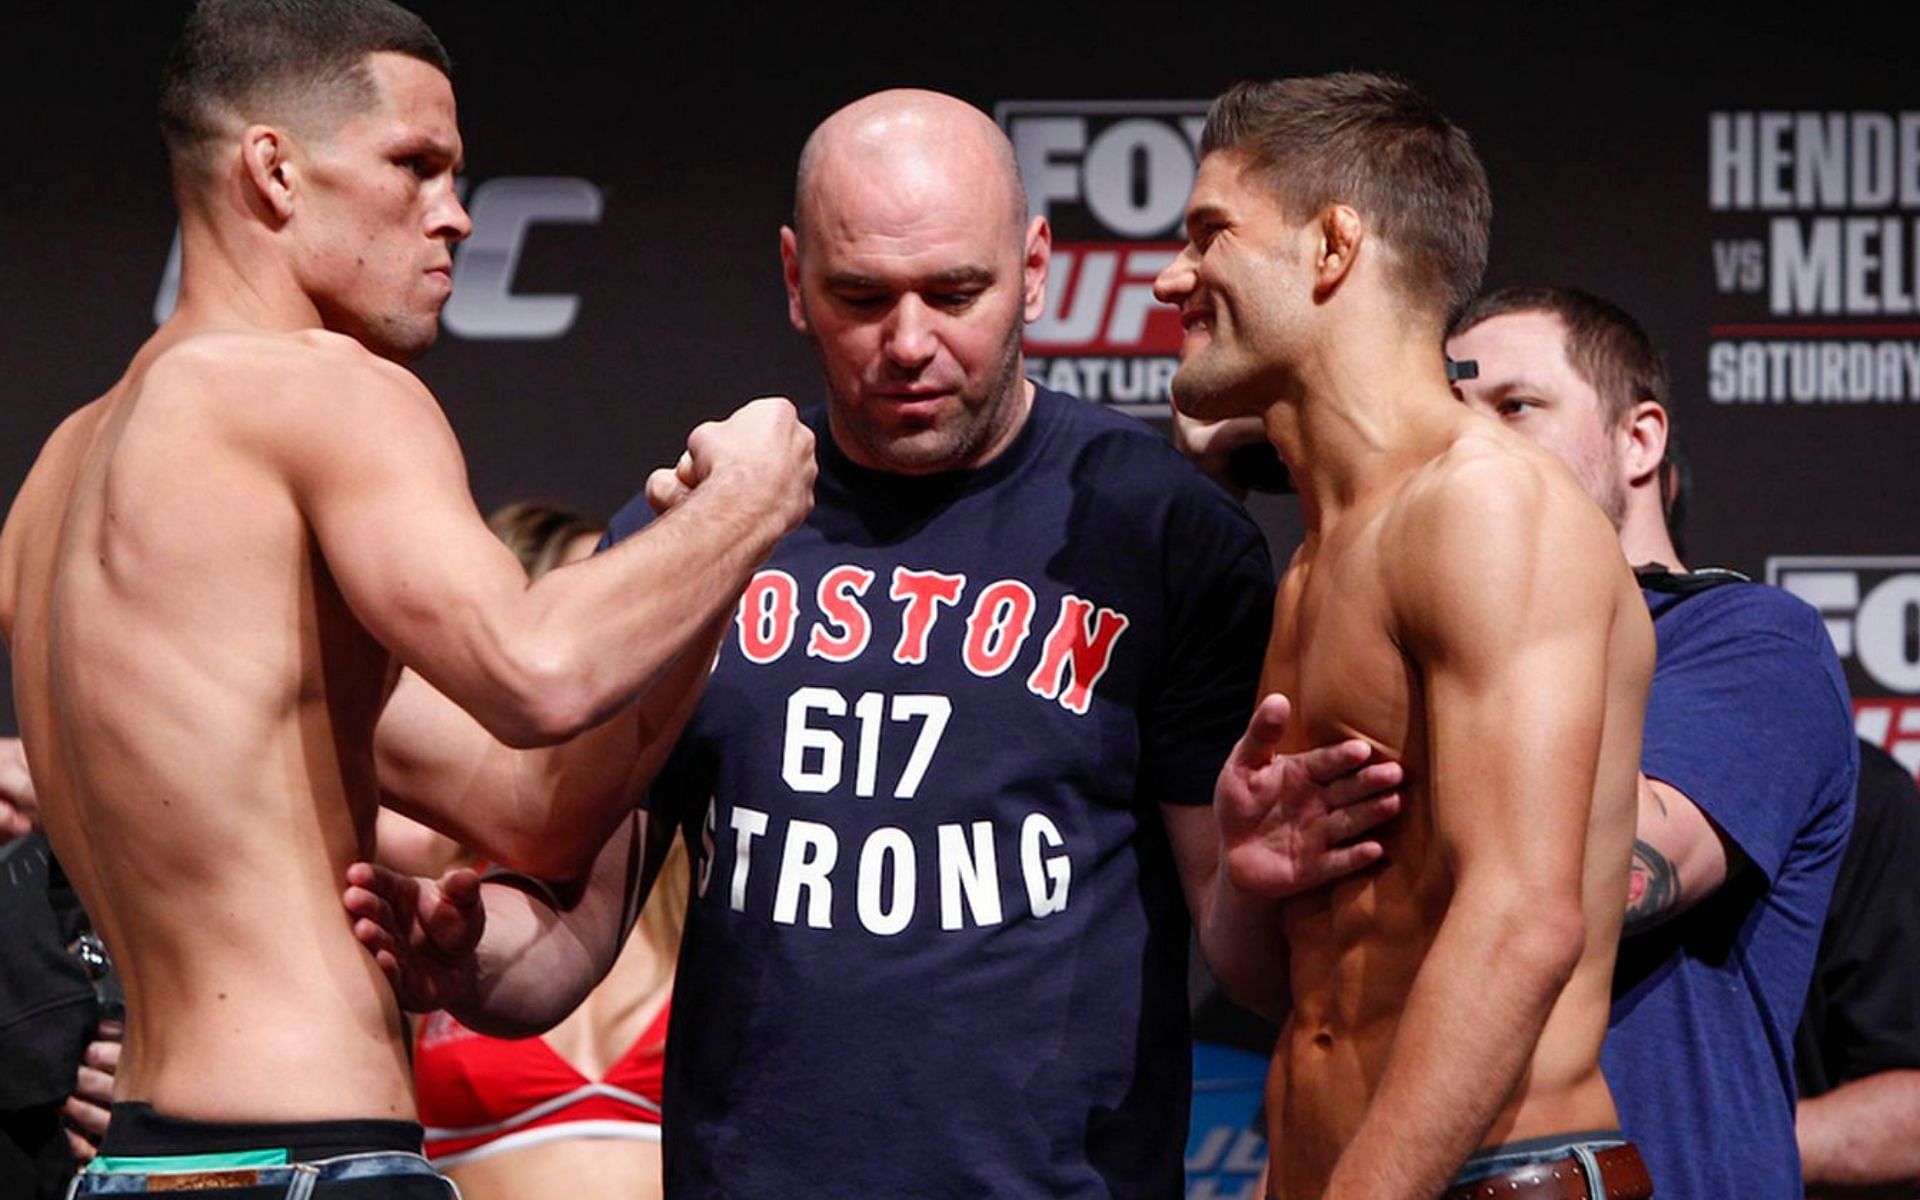 Josh Thomson claims Nate Diaz was allowed to fight him despite missing weight